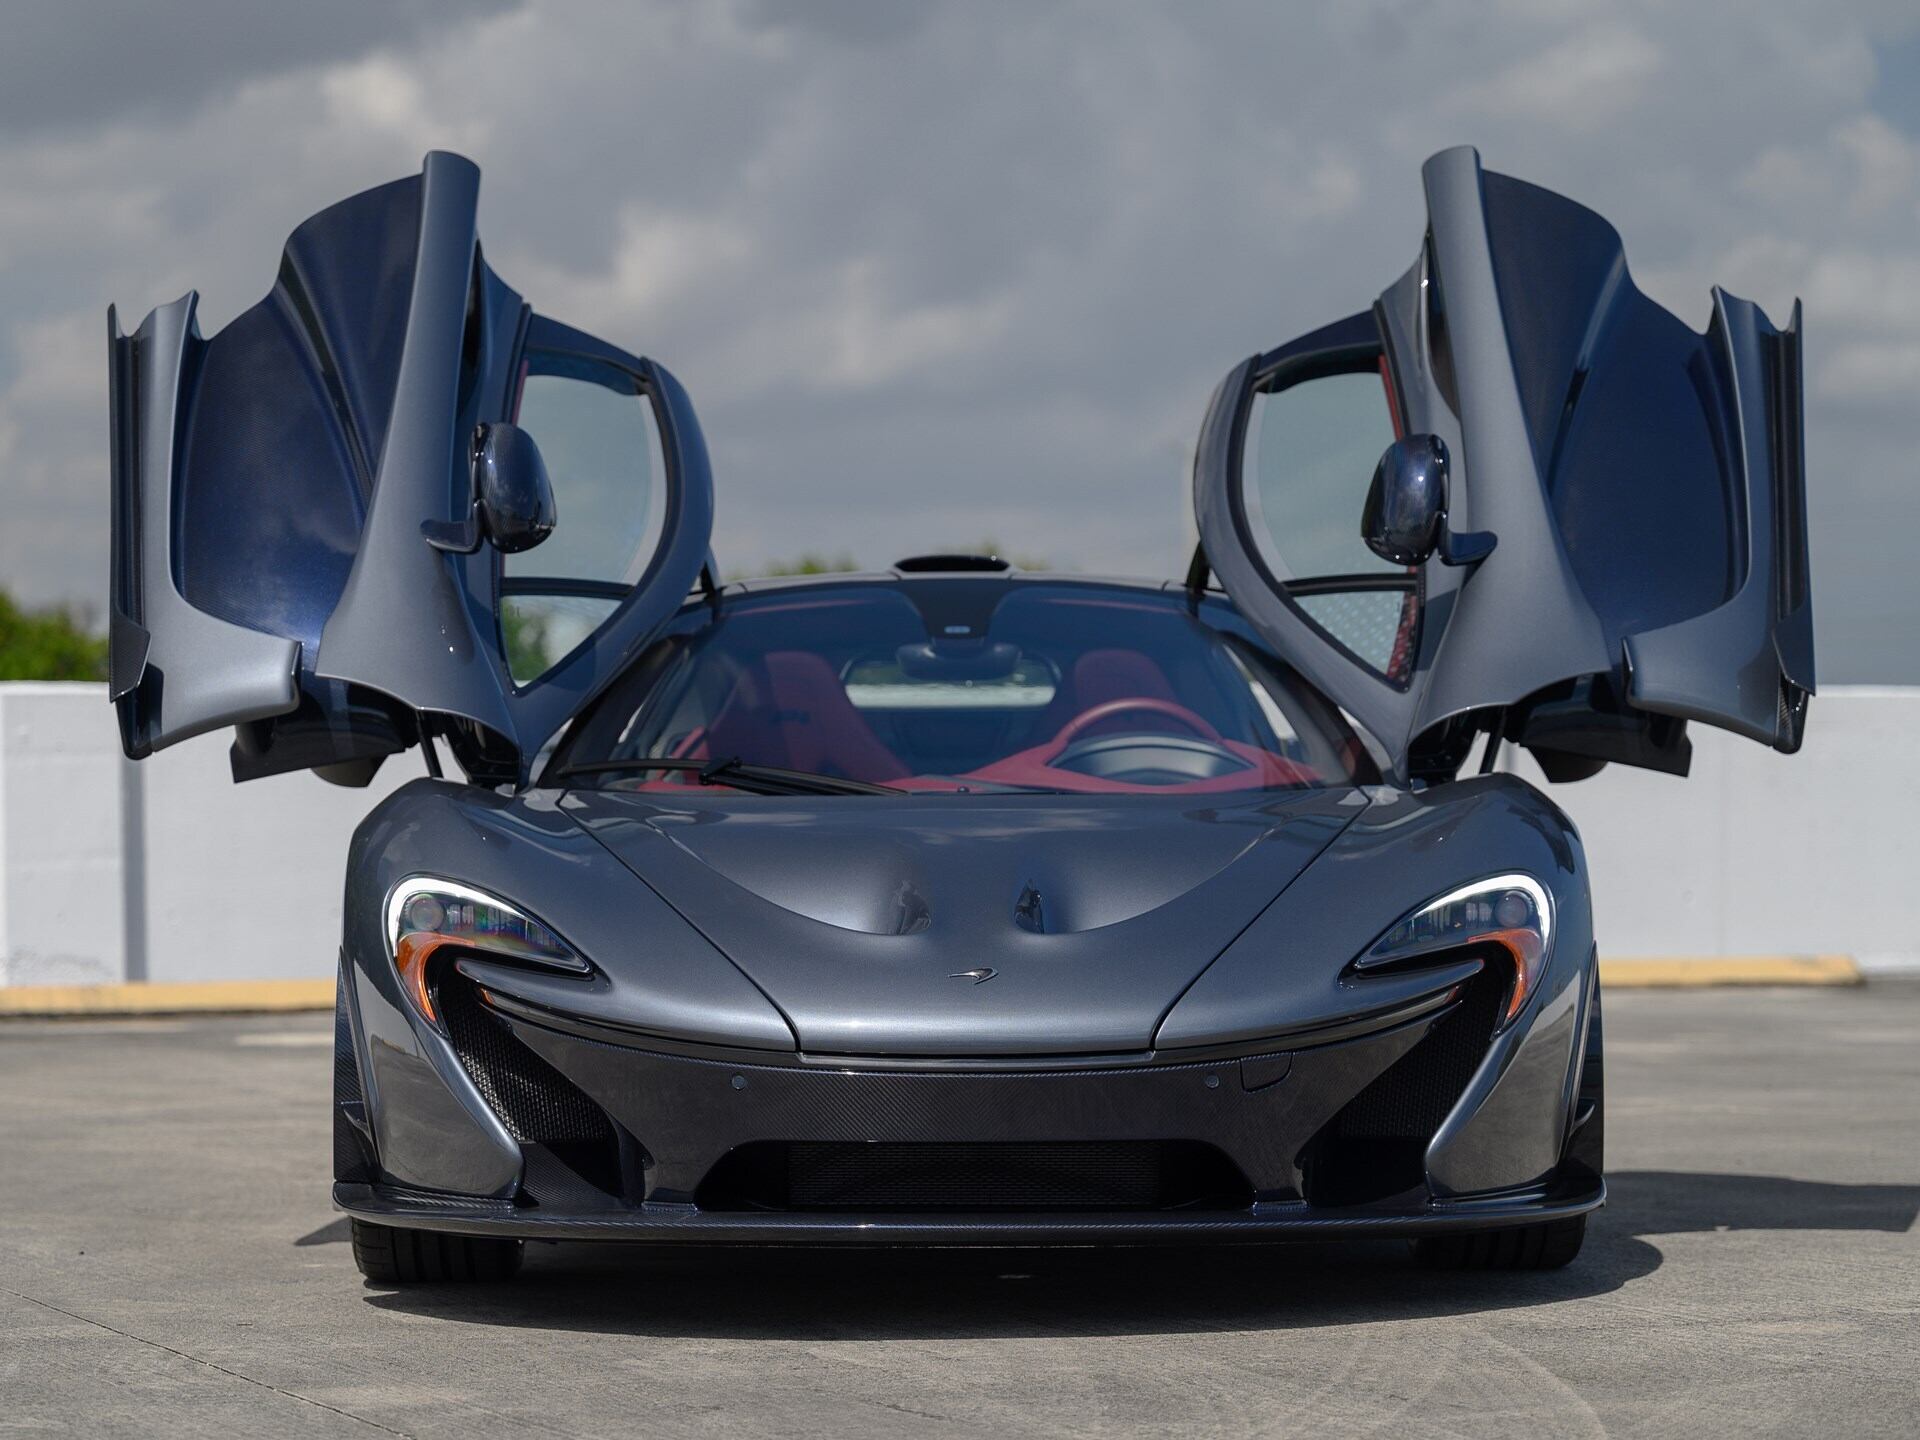 Front view of a grey 2015 McLaren P1 with butterfly doors open